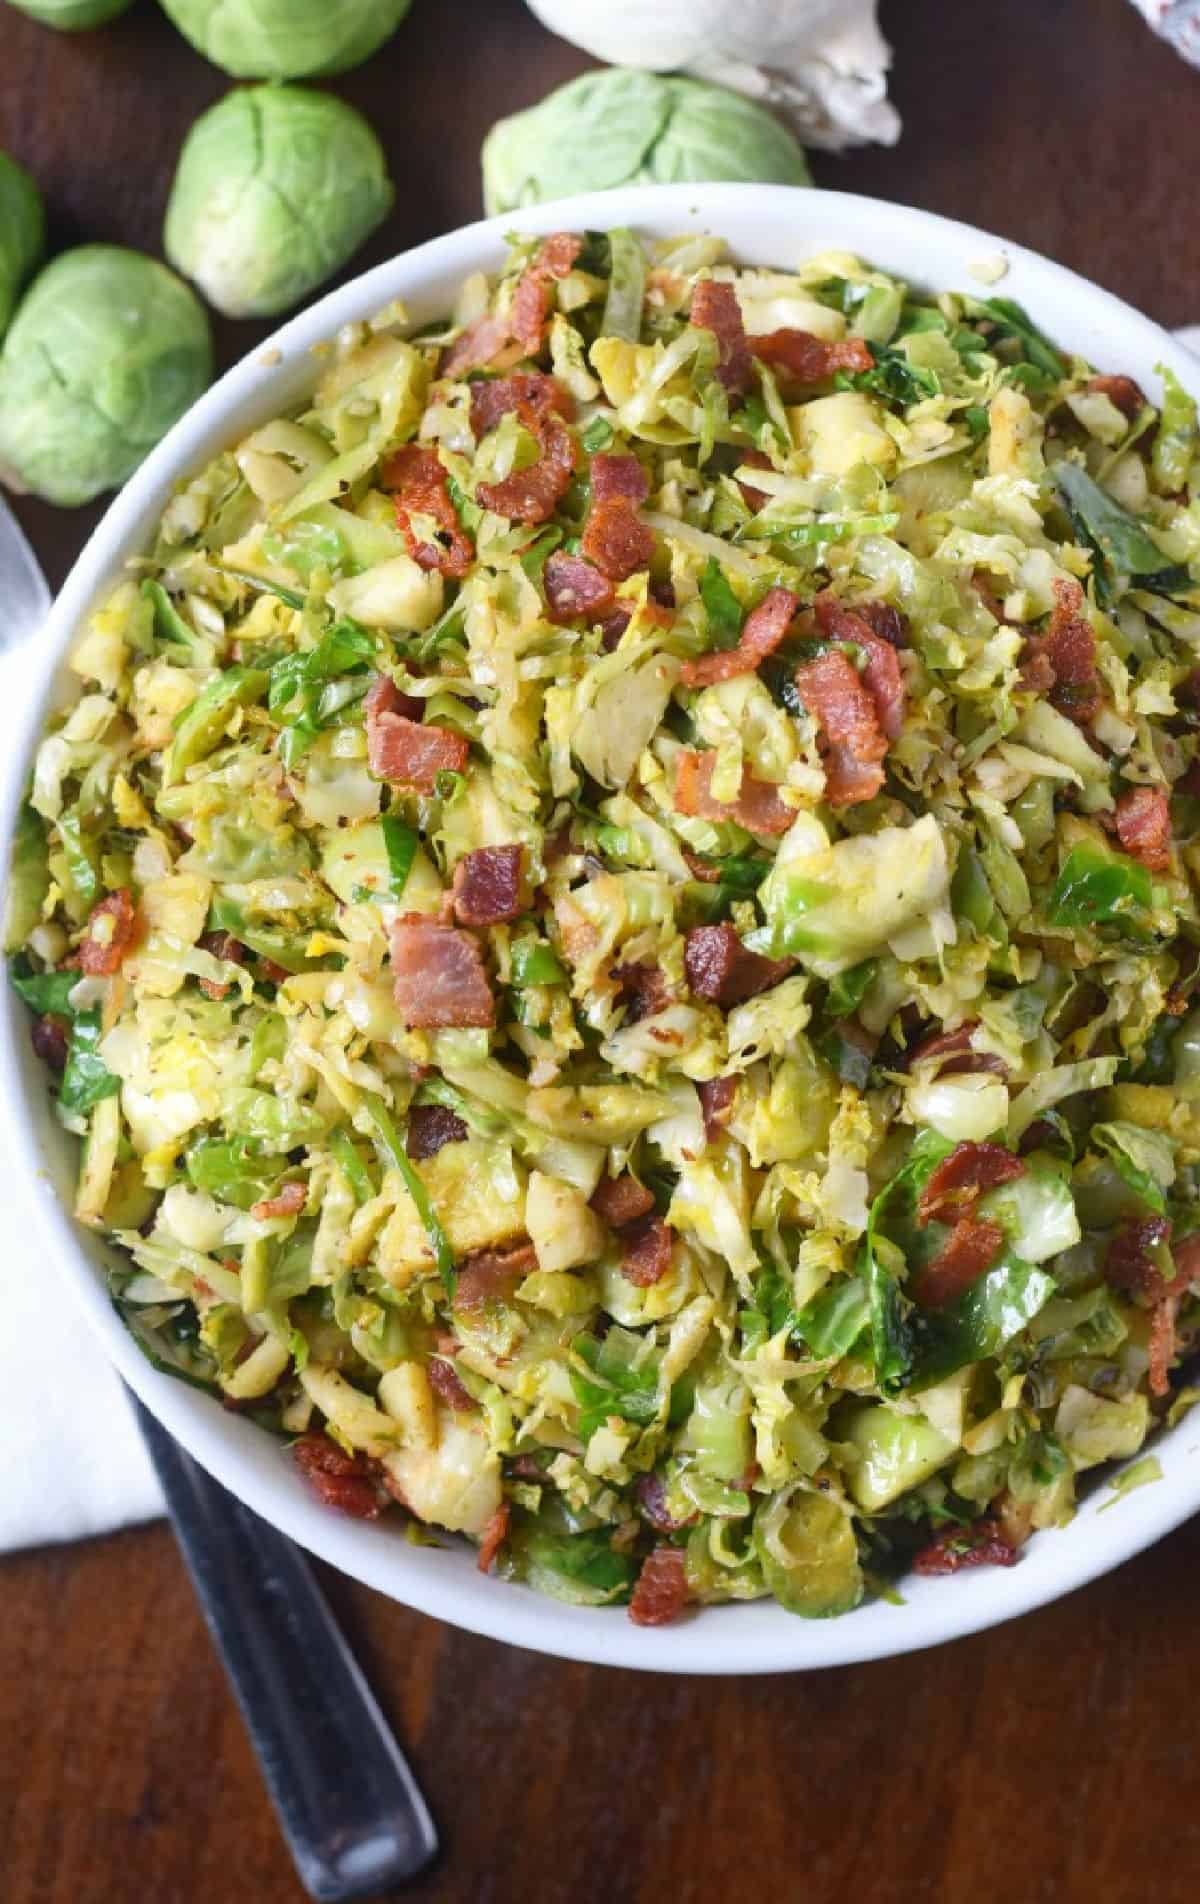 Brussels sprouts with bacon in a white bowl.